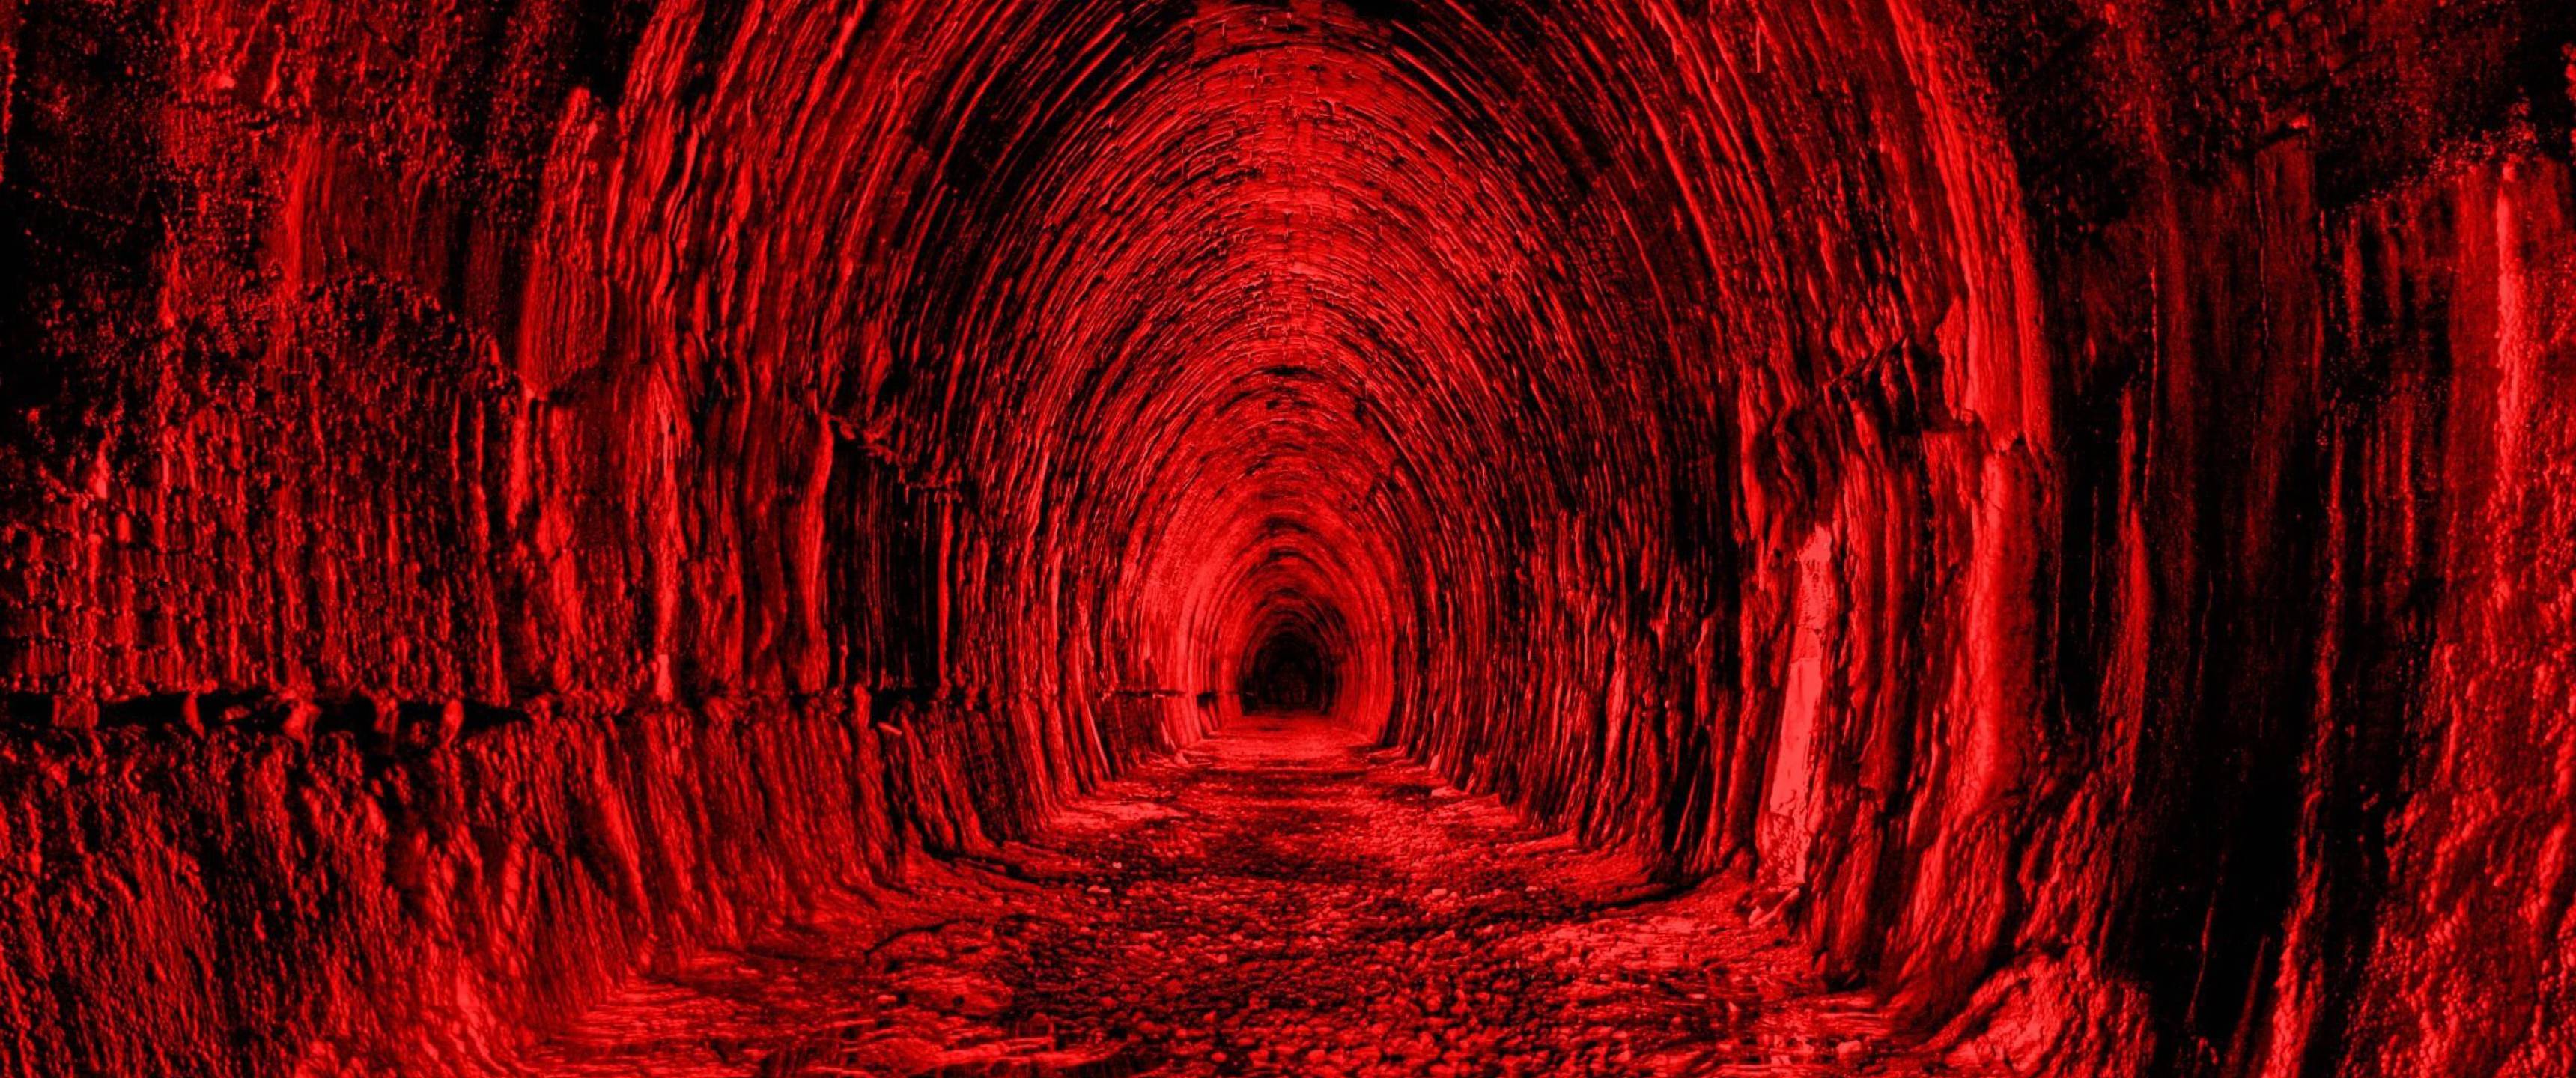 Red Aesthetic Tunnel 3440x1440 Resolution Wallpaper, HD Artist 4K Wallpaper, Image, Photo and Background